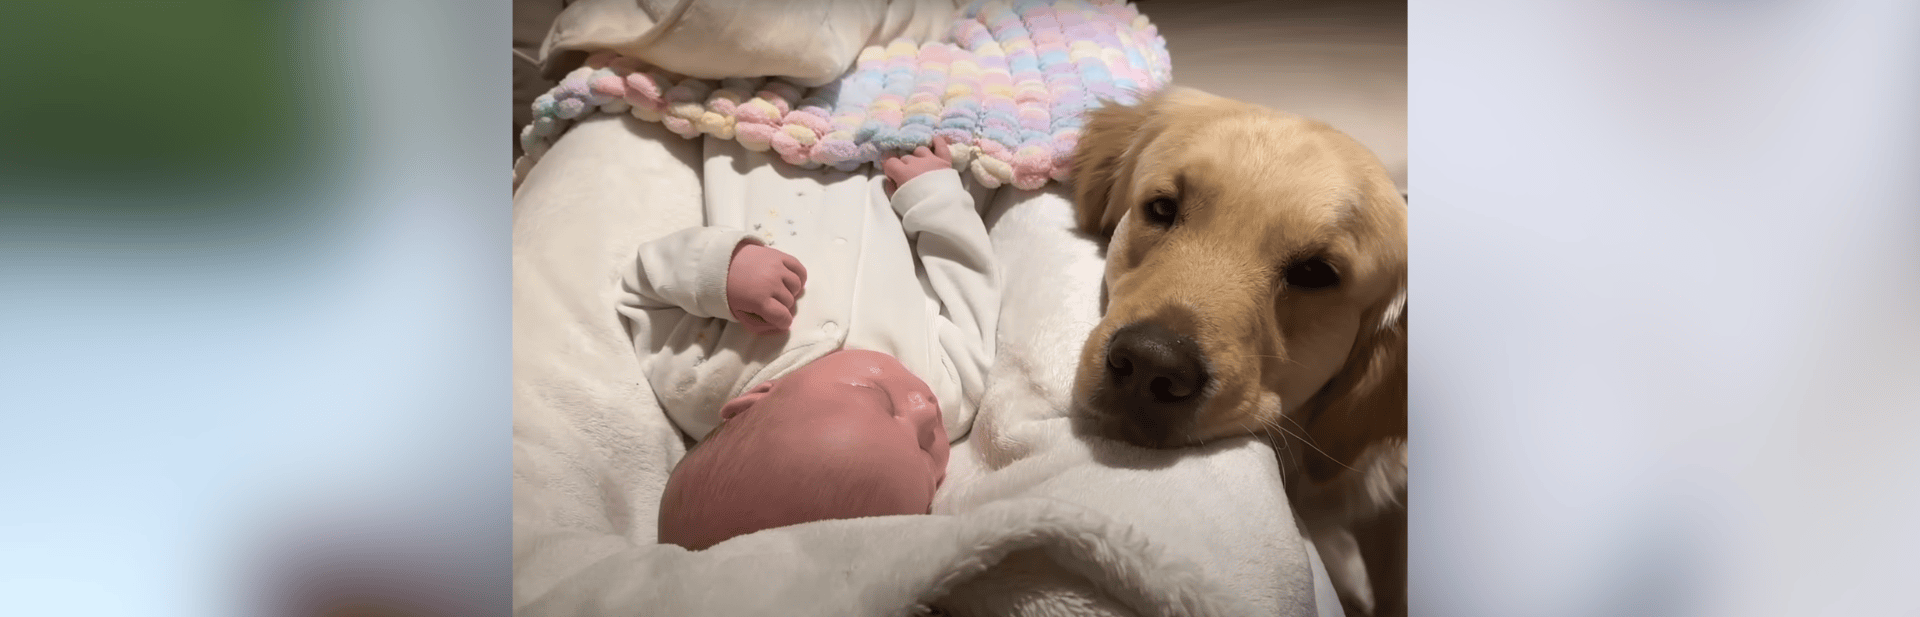 Sweet Golden Retriever Watches Over Newborn Baby And Finds His Life’s Purpose